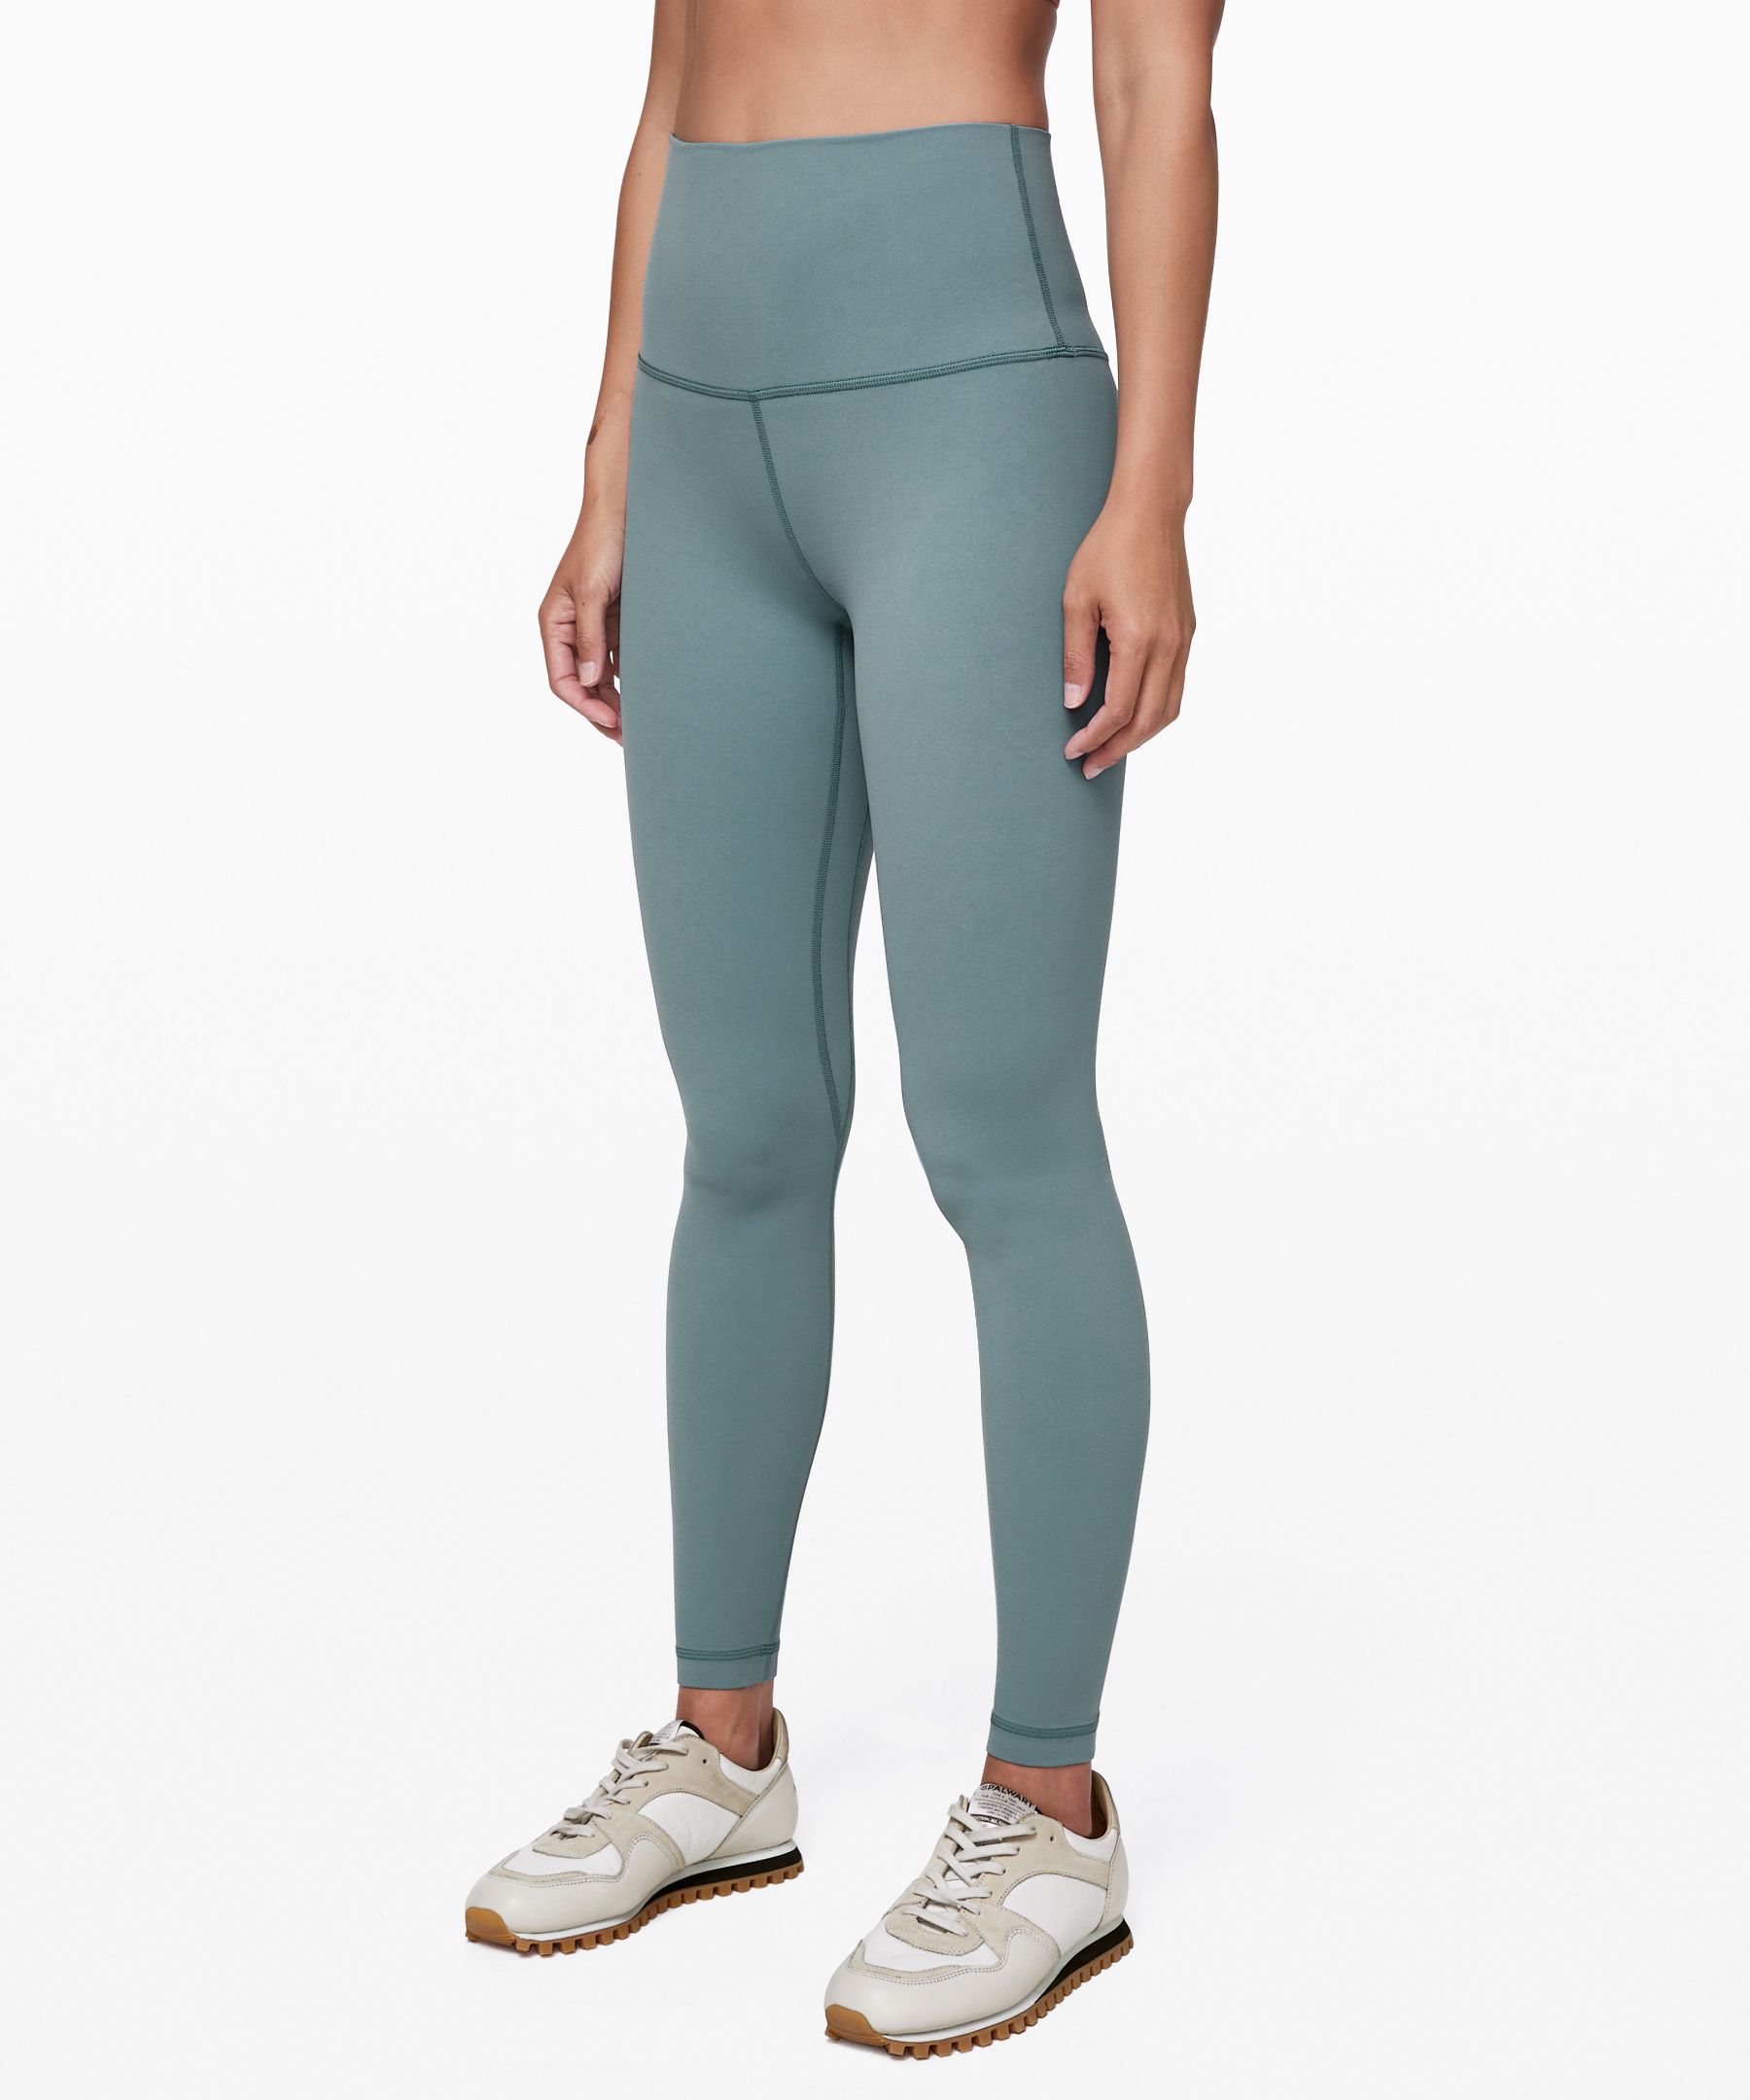 Lululemon Align Super-high Rise Pant 28" *online Only In Aquatic Green